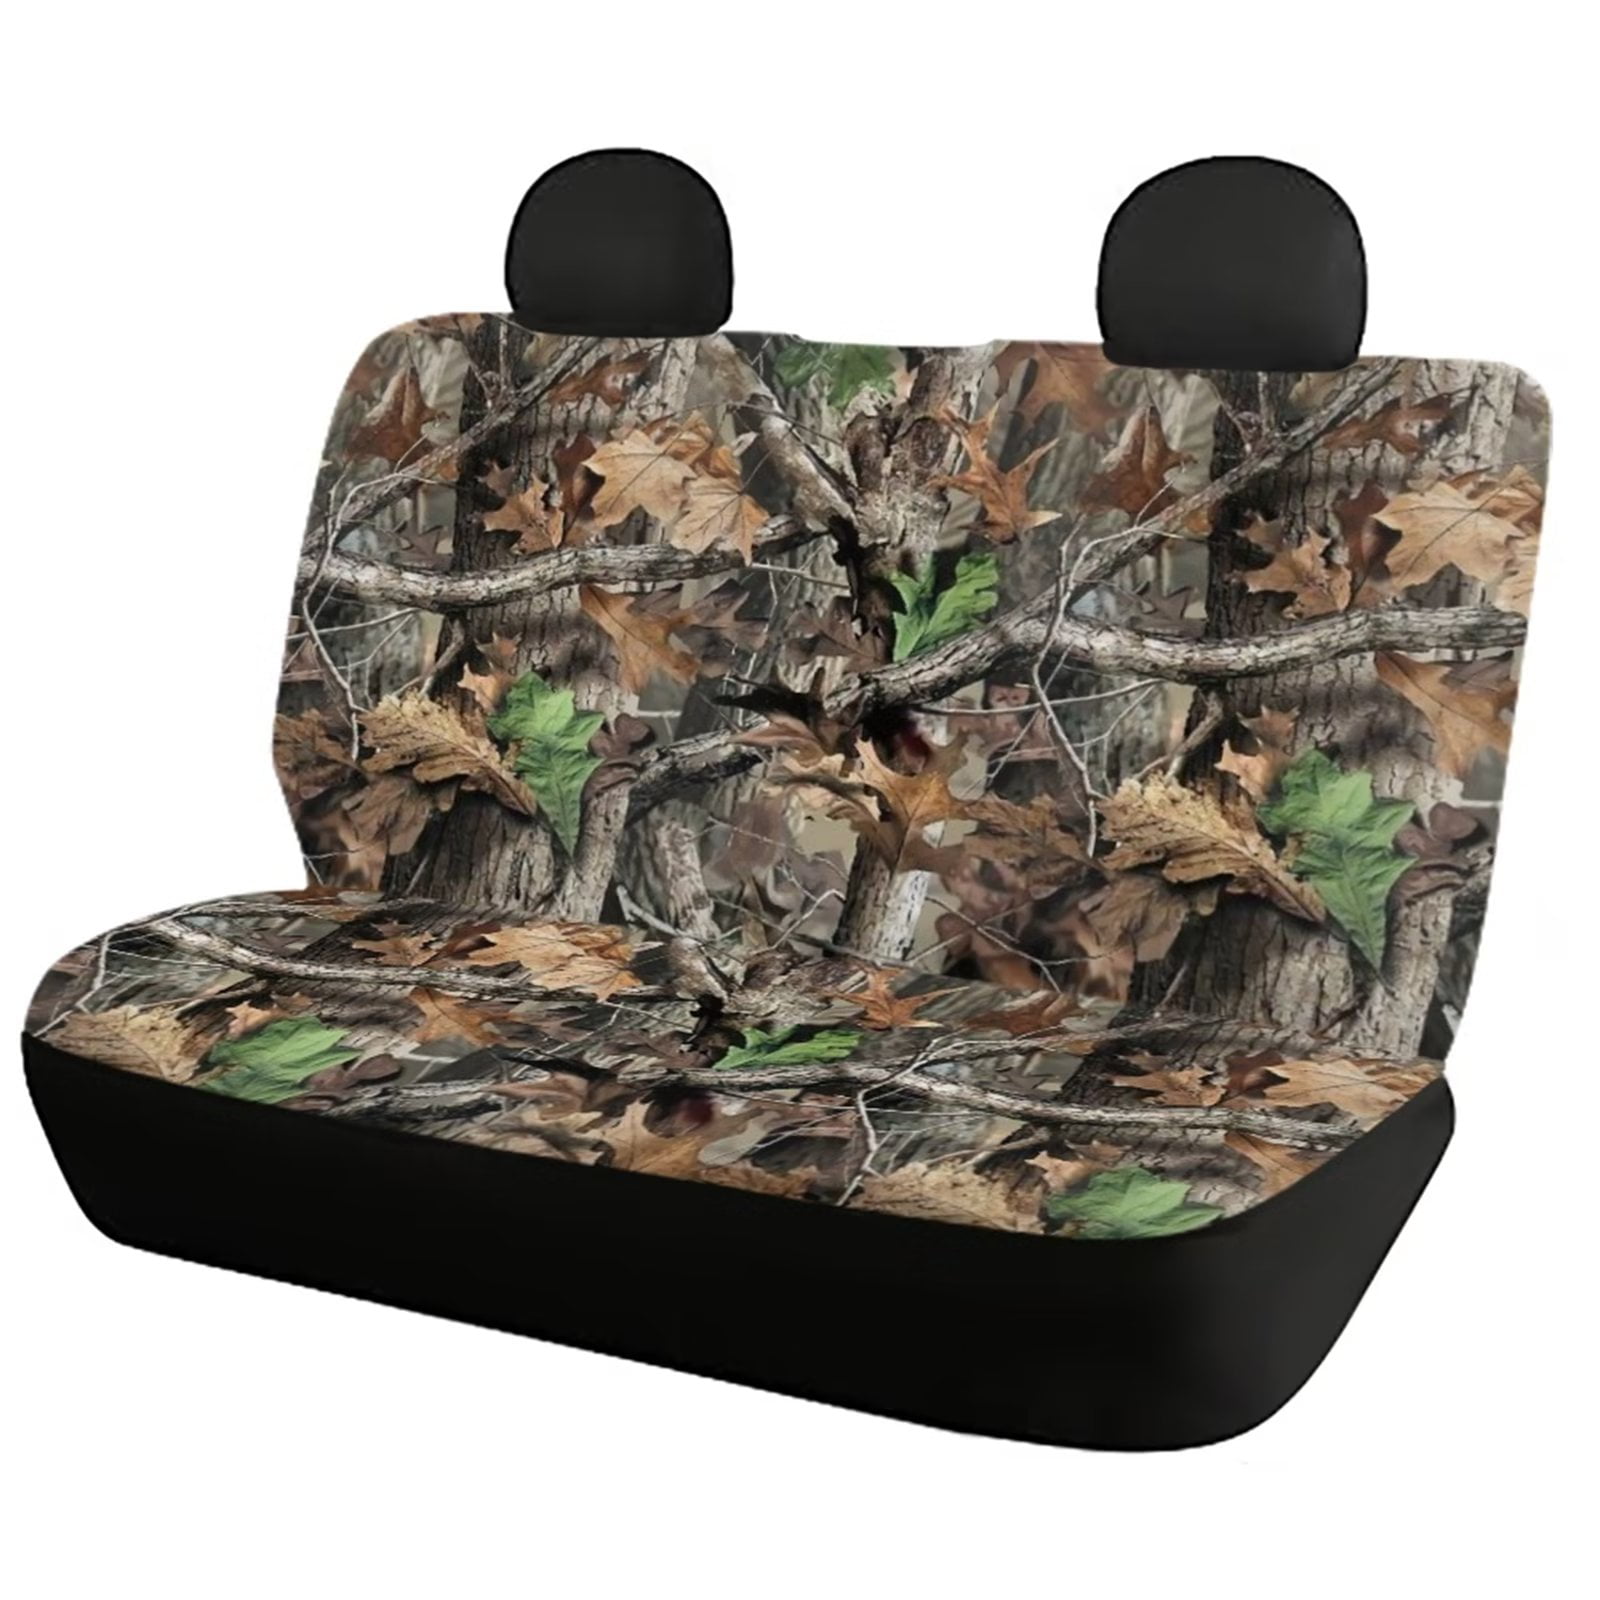  TOYOUN Camo Universal Front Car Seat Covers Waterproof Highback  Bucket Seat Covers-Fit Most Cars, Trucks, SUVS, Vans 2 PCS Auto Fabric Seat  Covers Camouflage Forest Pattern Car Seat Protector : Automotive